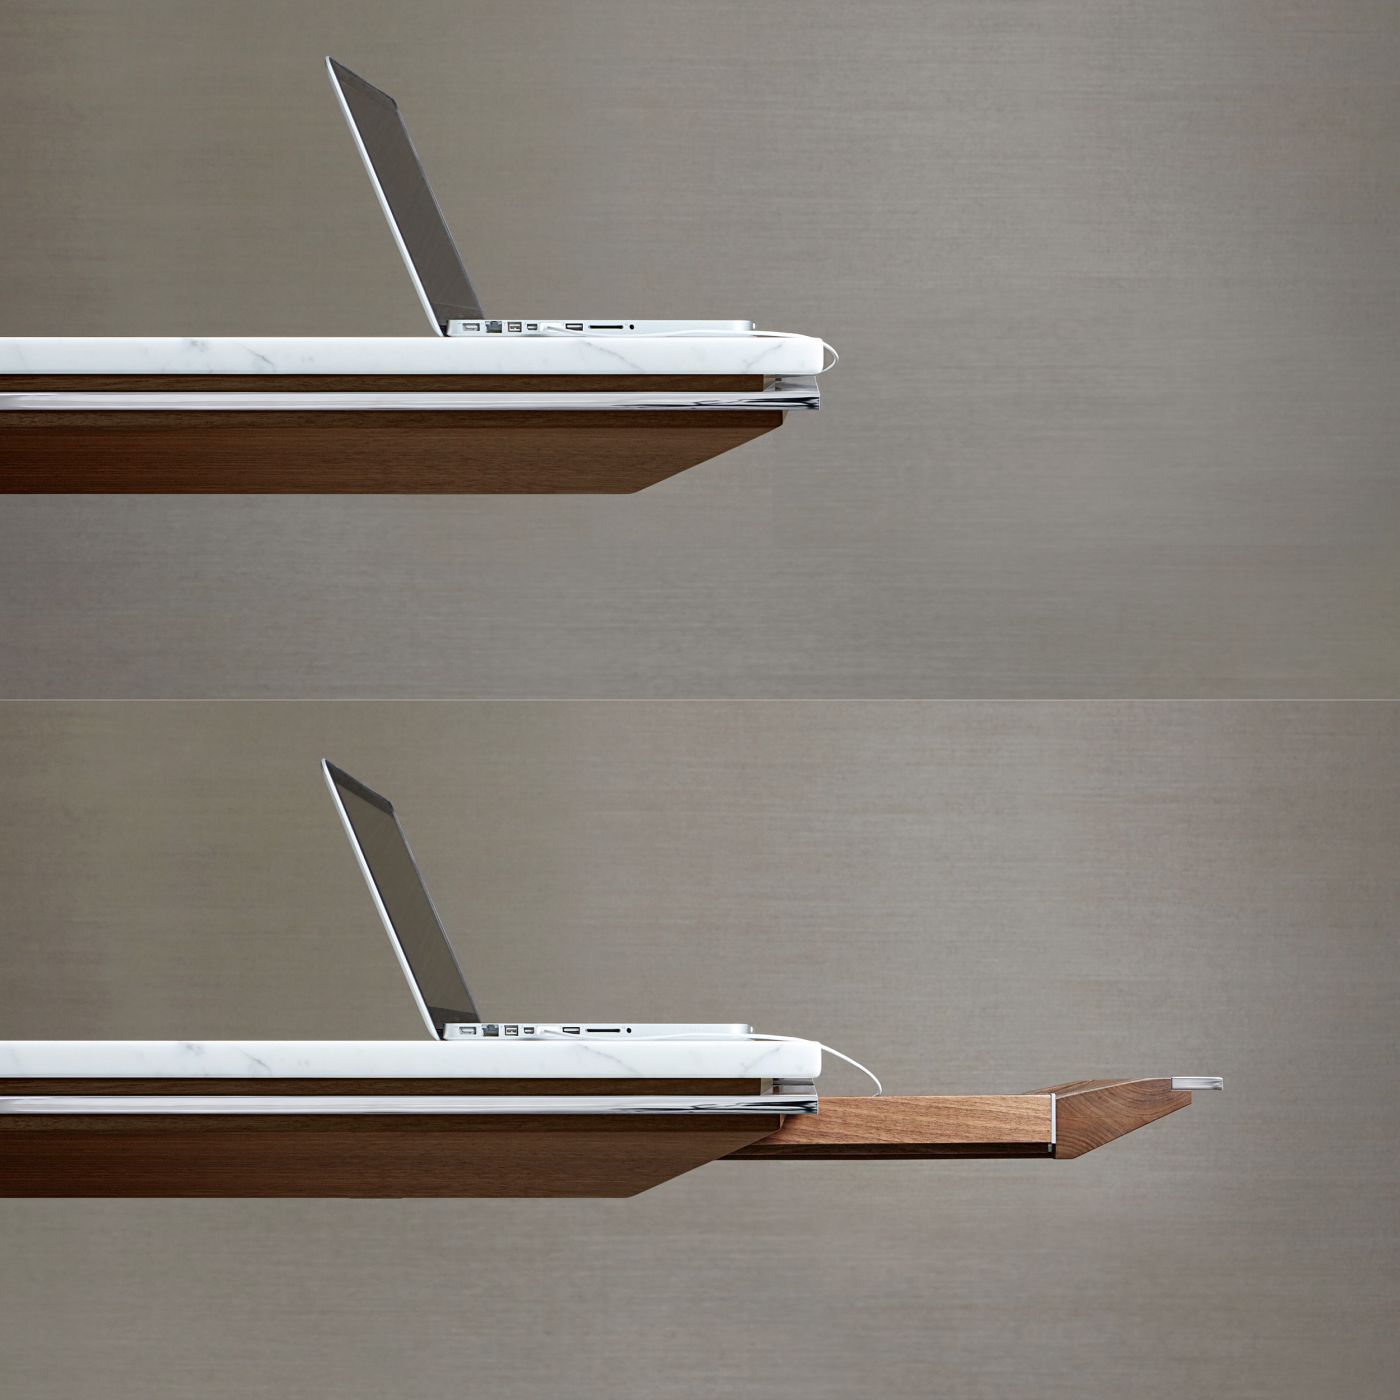 Eliminate surface clutter and comfortably access technology with innovative concealed drawers.